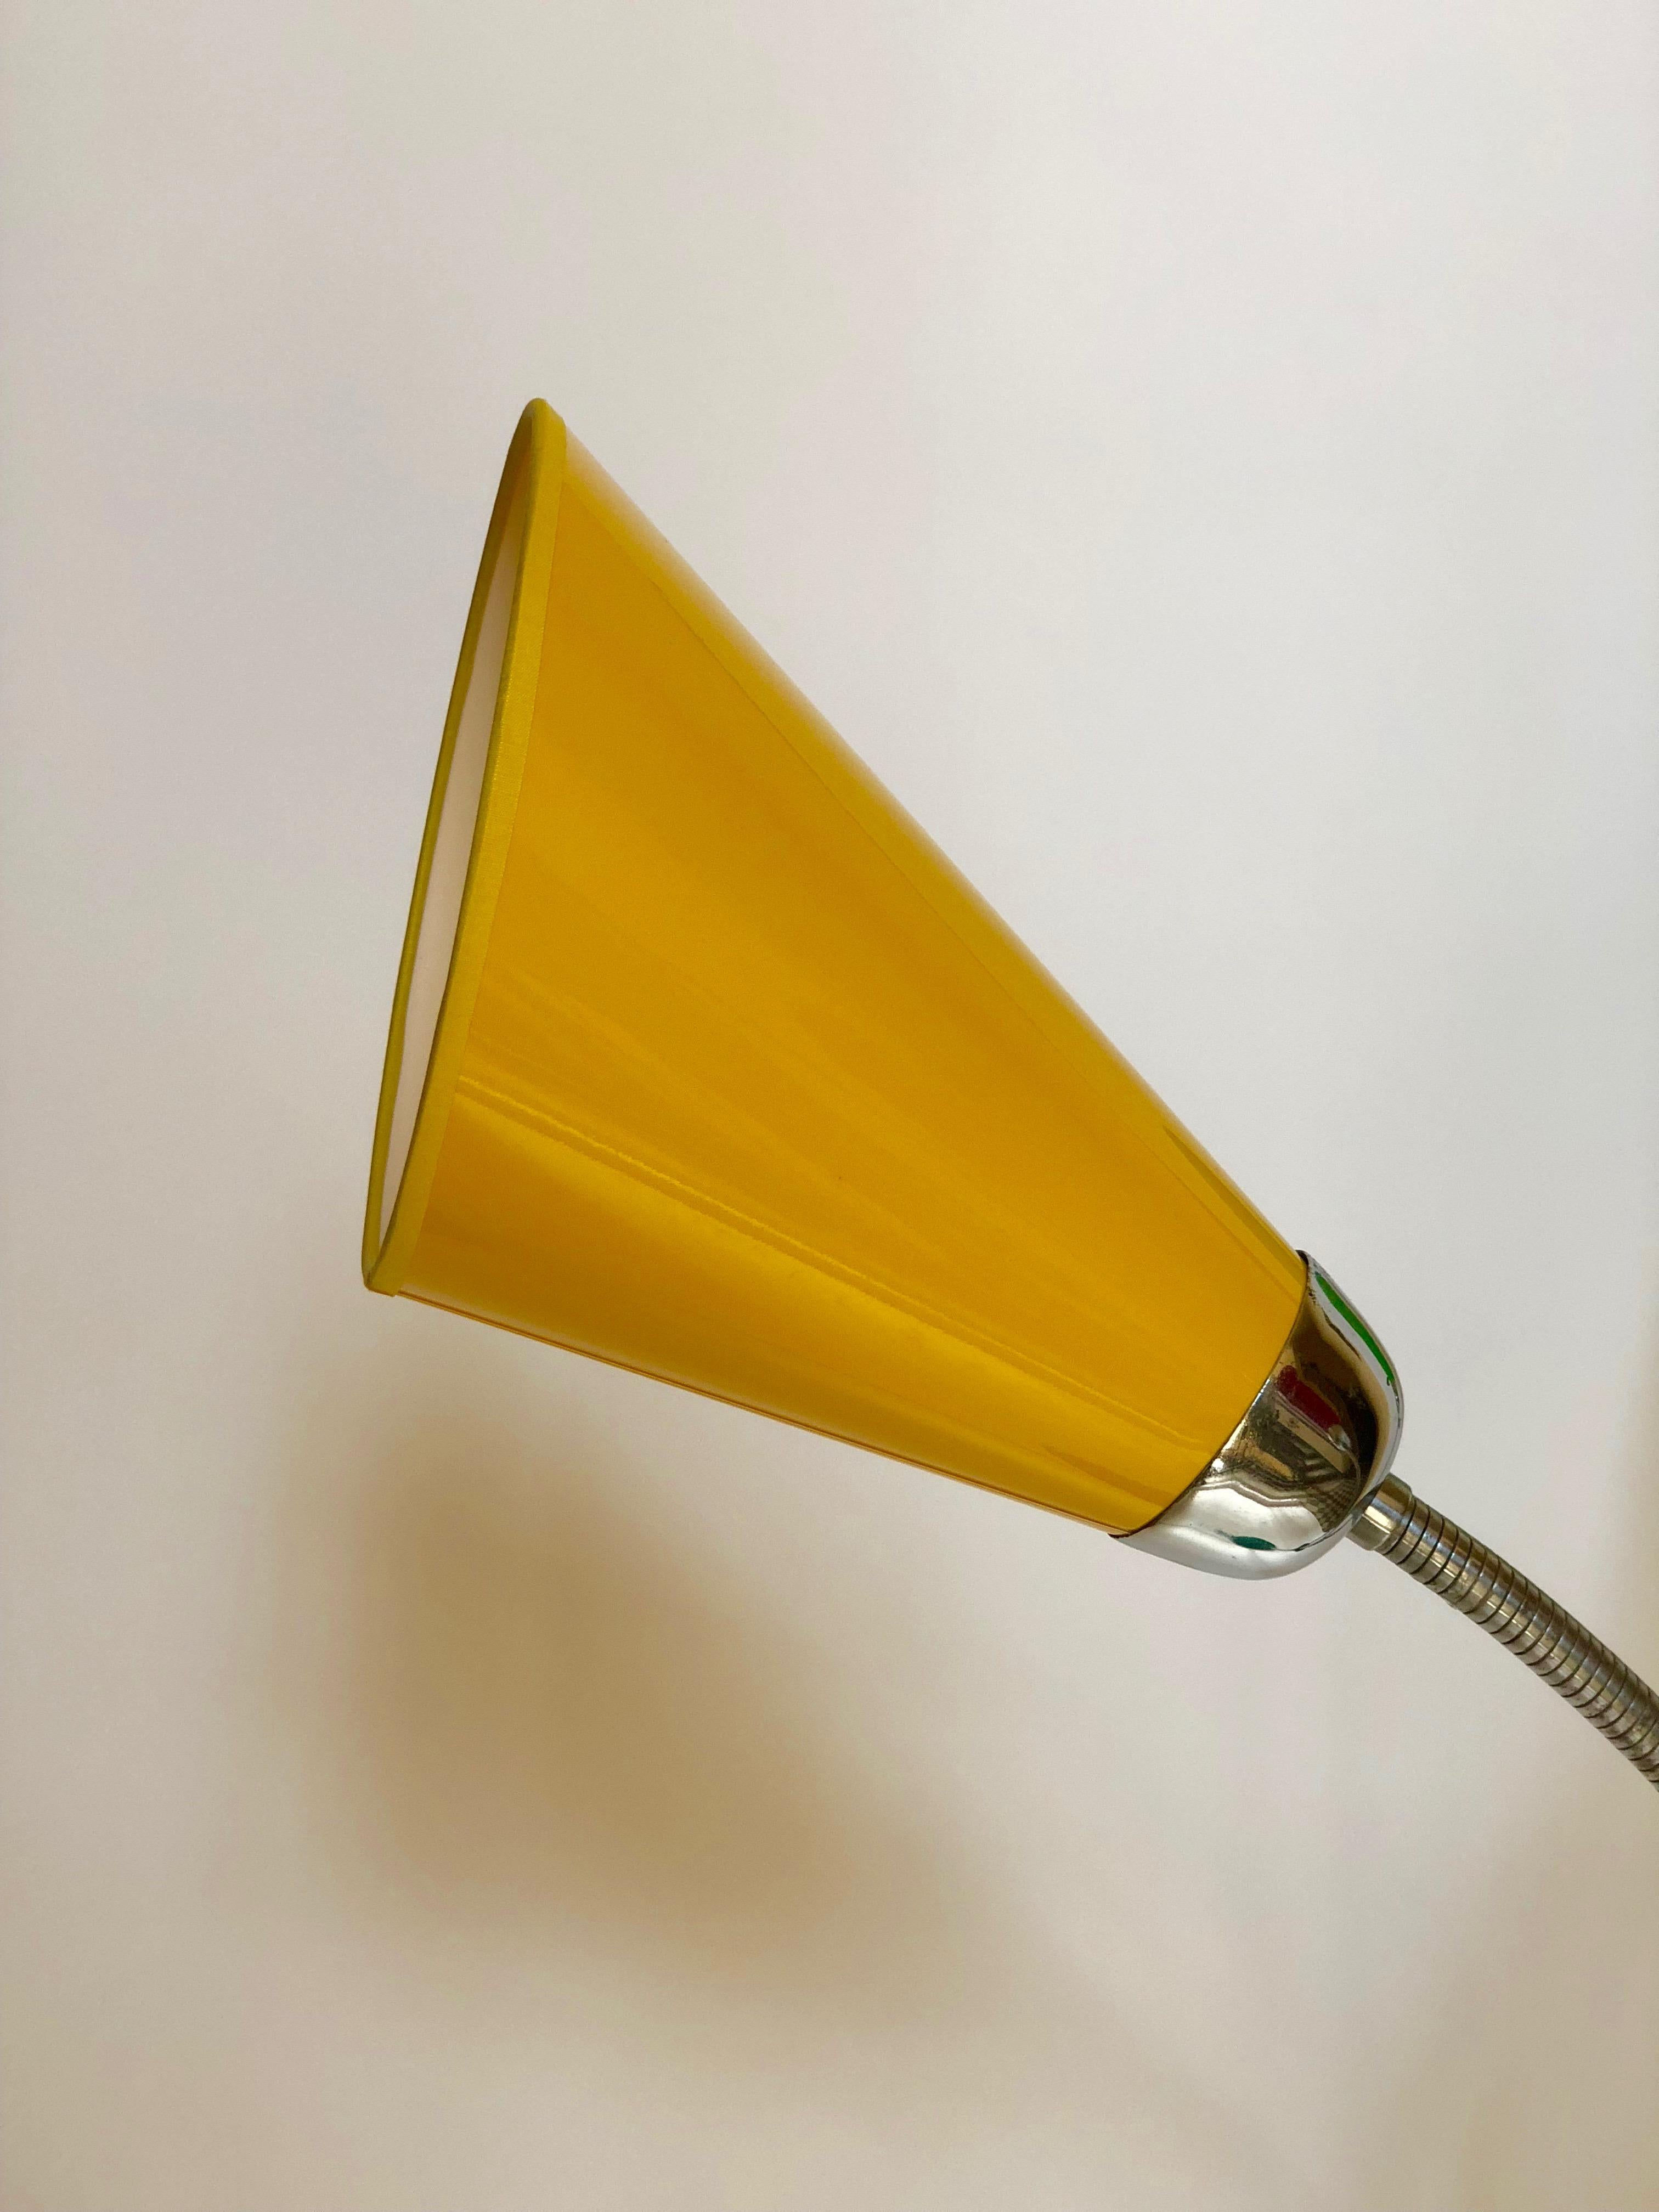 Midcentury Floor Lamp with 3 Shades in Yellow, Green and Red In Good Condition For Sale In Vienna, Austria